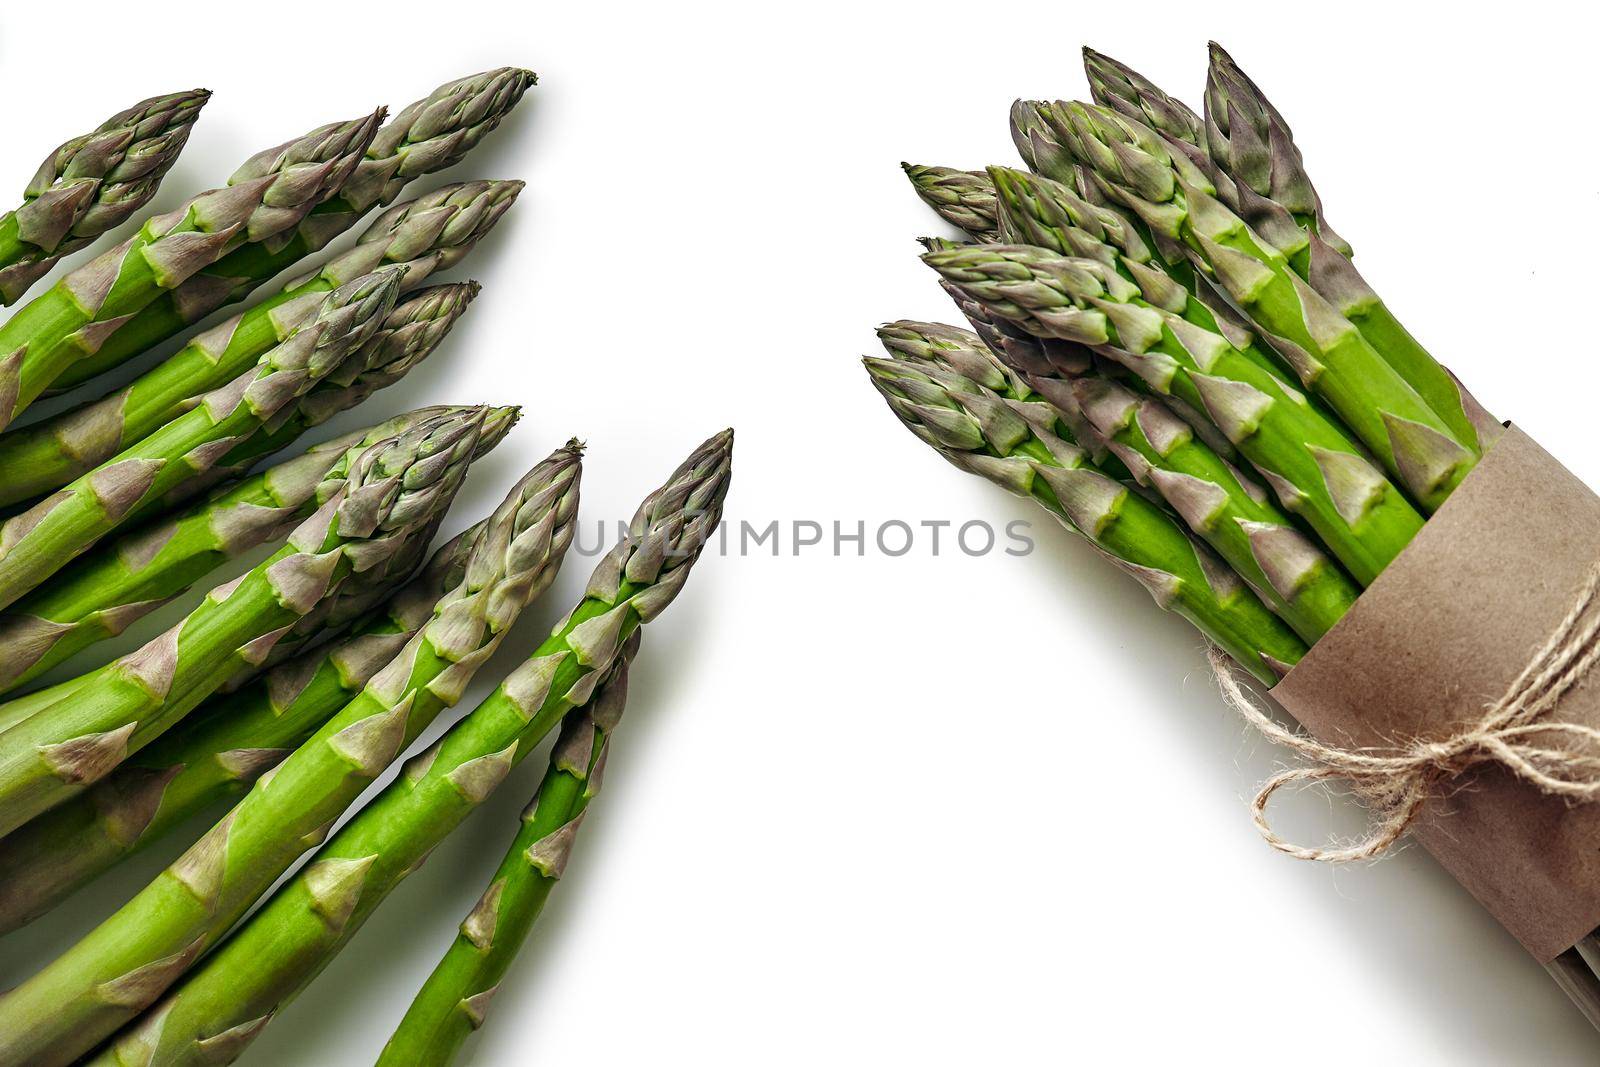 Bunch of an edible, green stems of asparagus isolated on white background. Fresh vegetables, top view. Healthy eating. Spring harvest, agricultural farming concept.